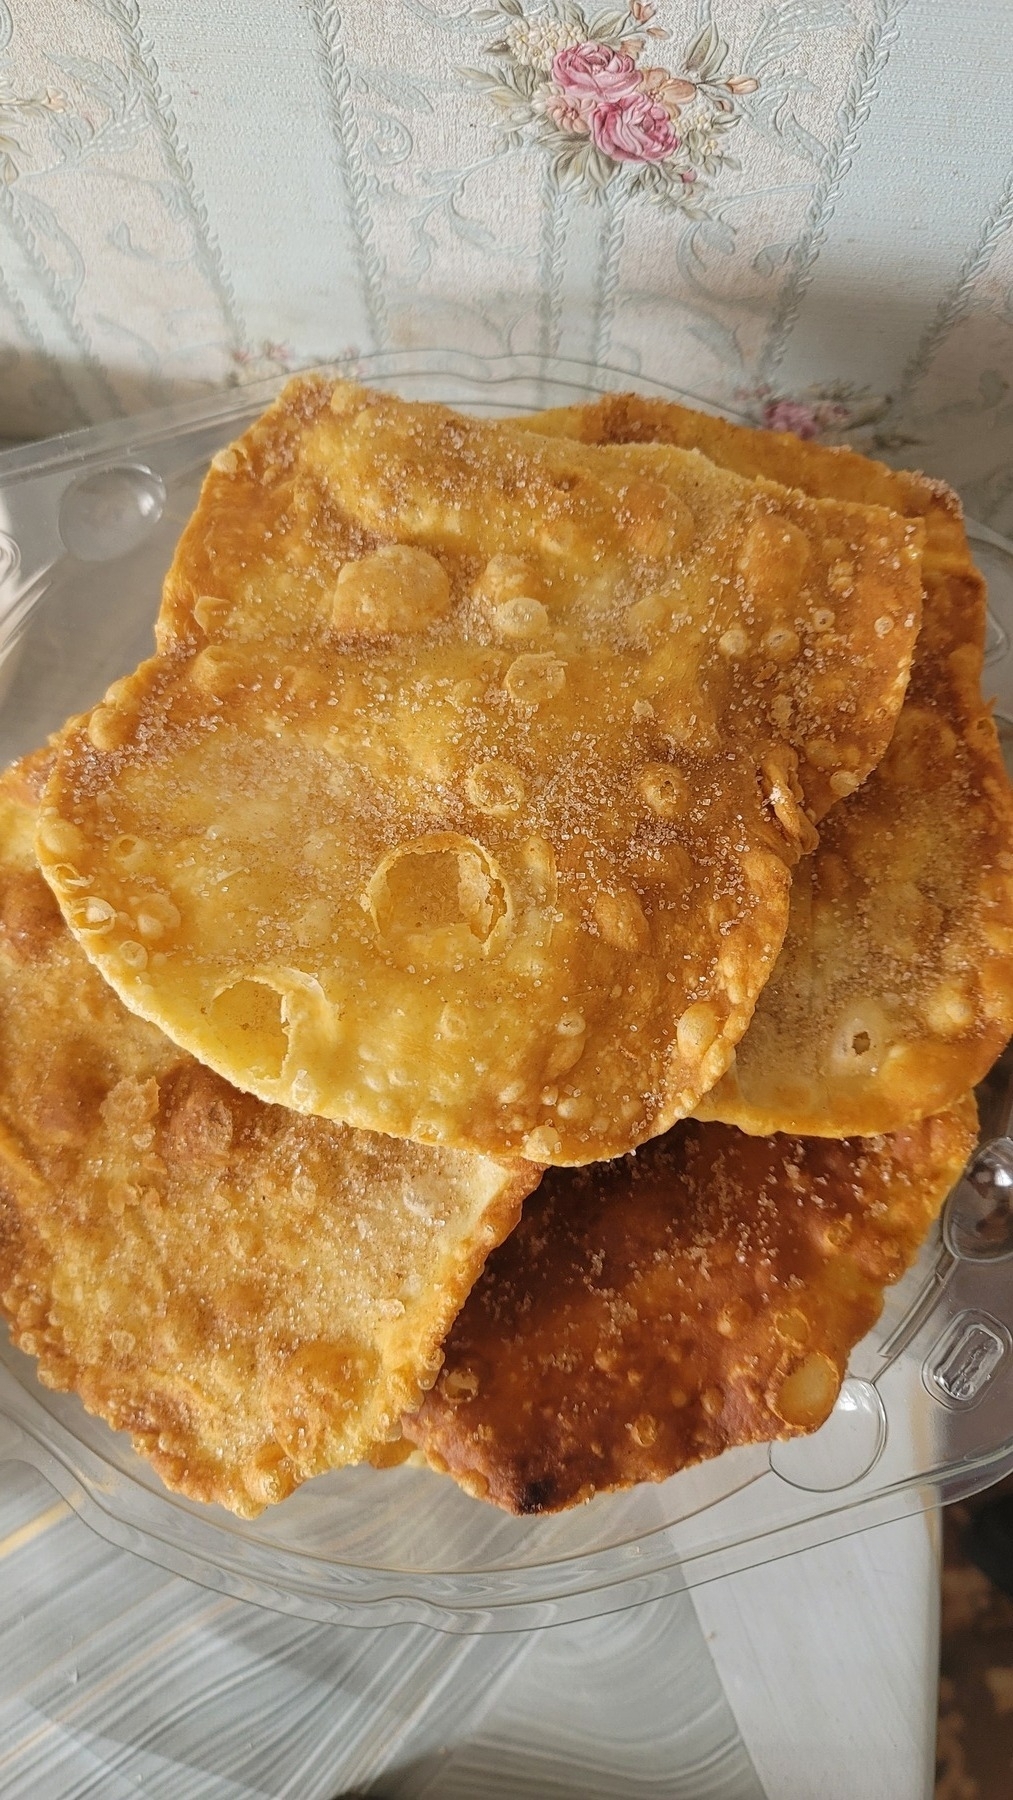 buñuelos (fried chips covered with cinnamon and sugar) in a plastic cake lid on a table